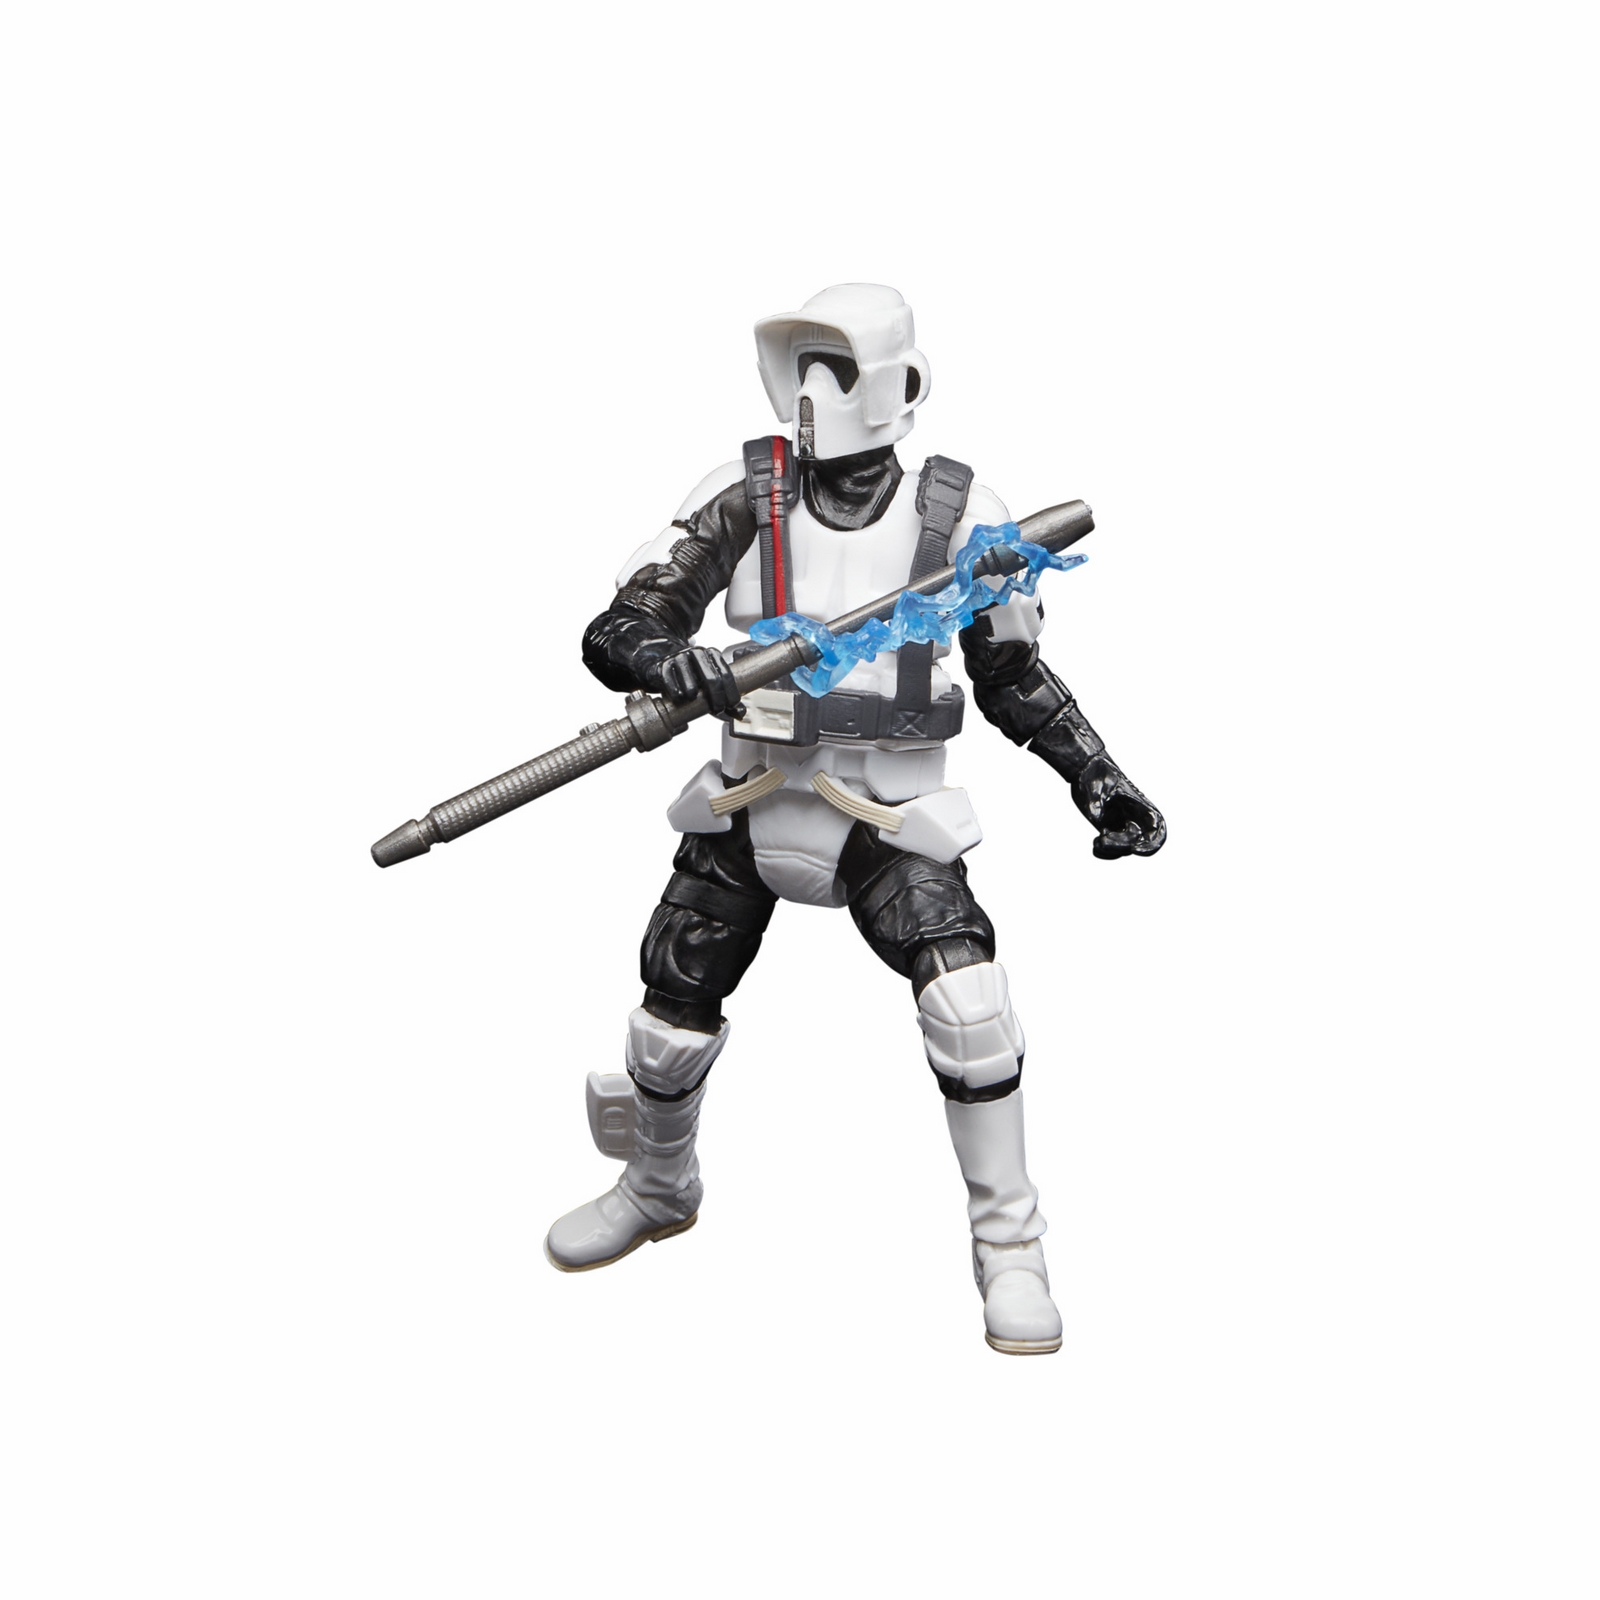 STAR WARS THE VINTAGE COLLECTION GAMING GREATS 3.75-INCH SHOCK SCOUT TROOPER Figure (5).jpg